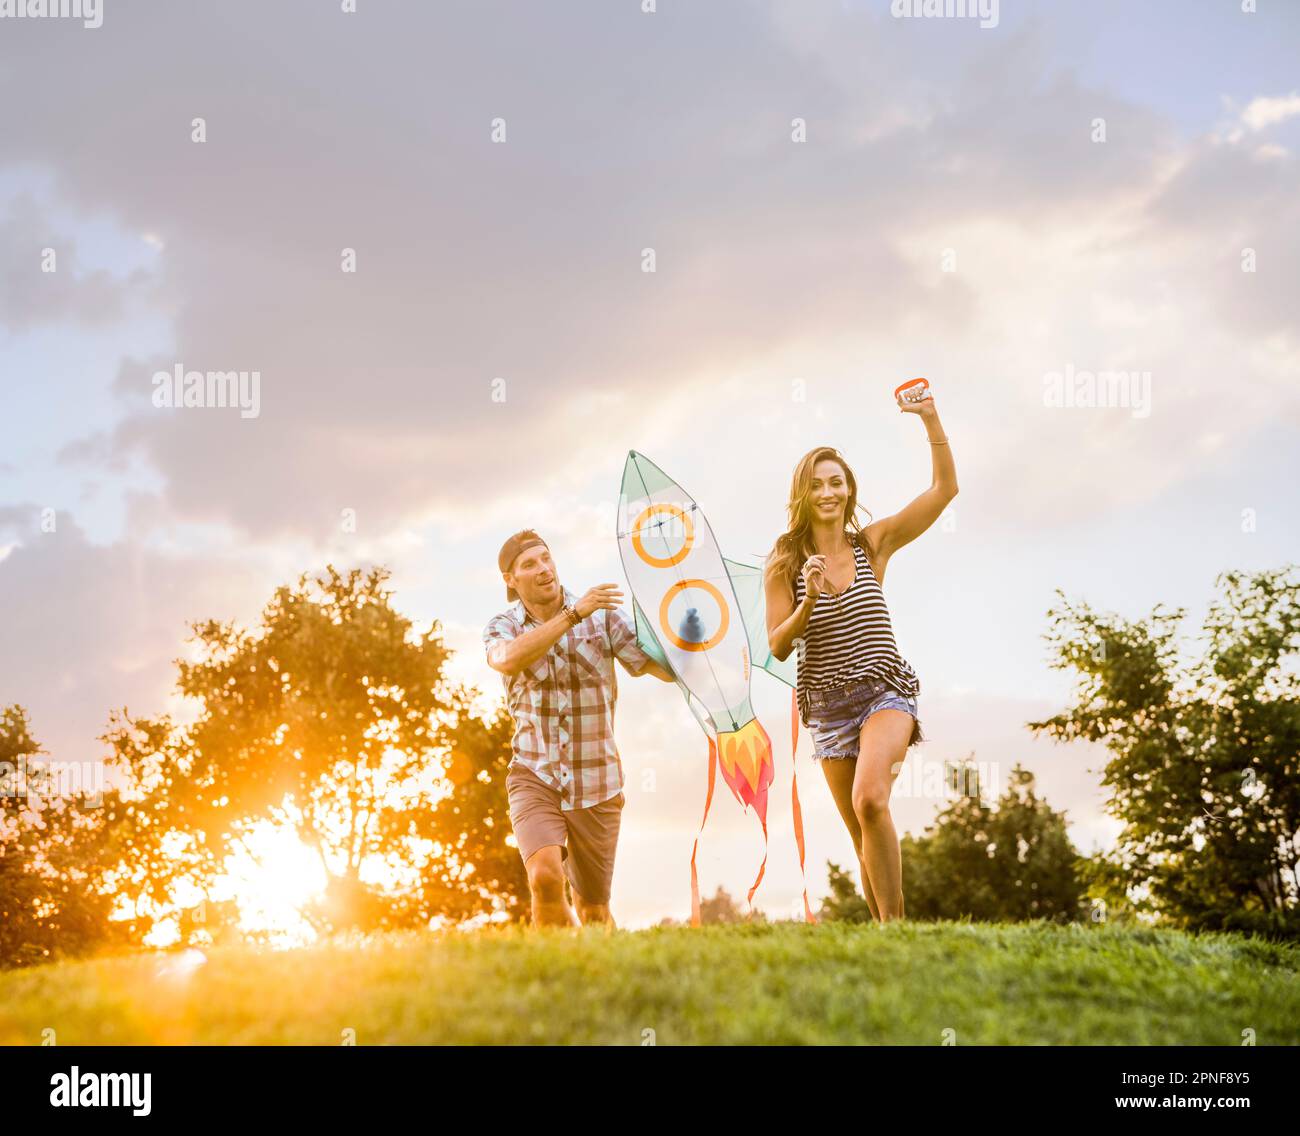 Woman and man running with kite in park at sunset Stock Photo